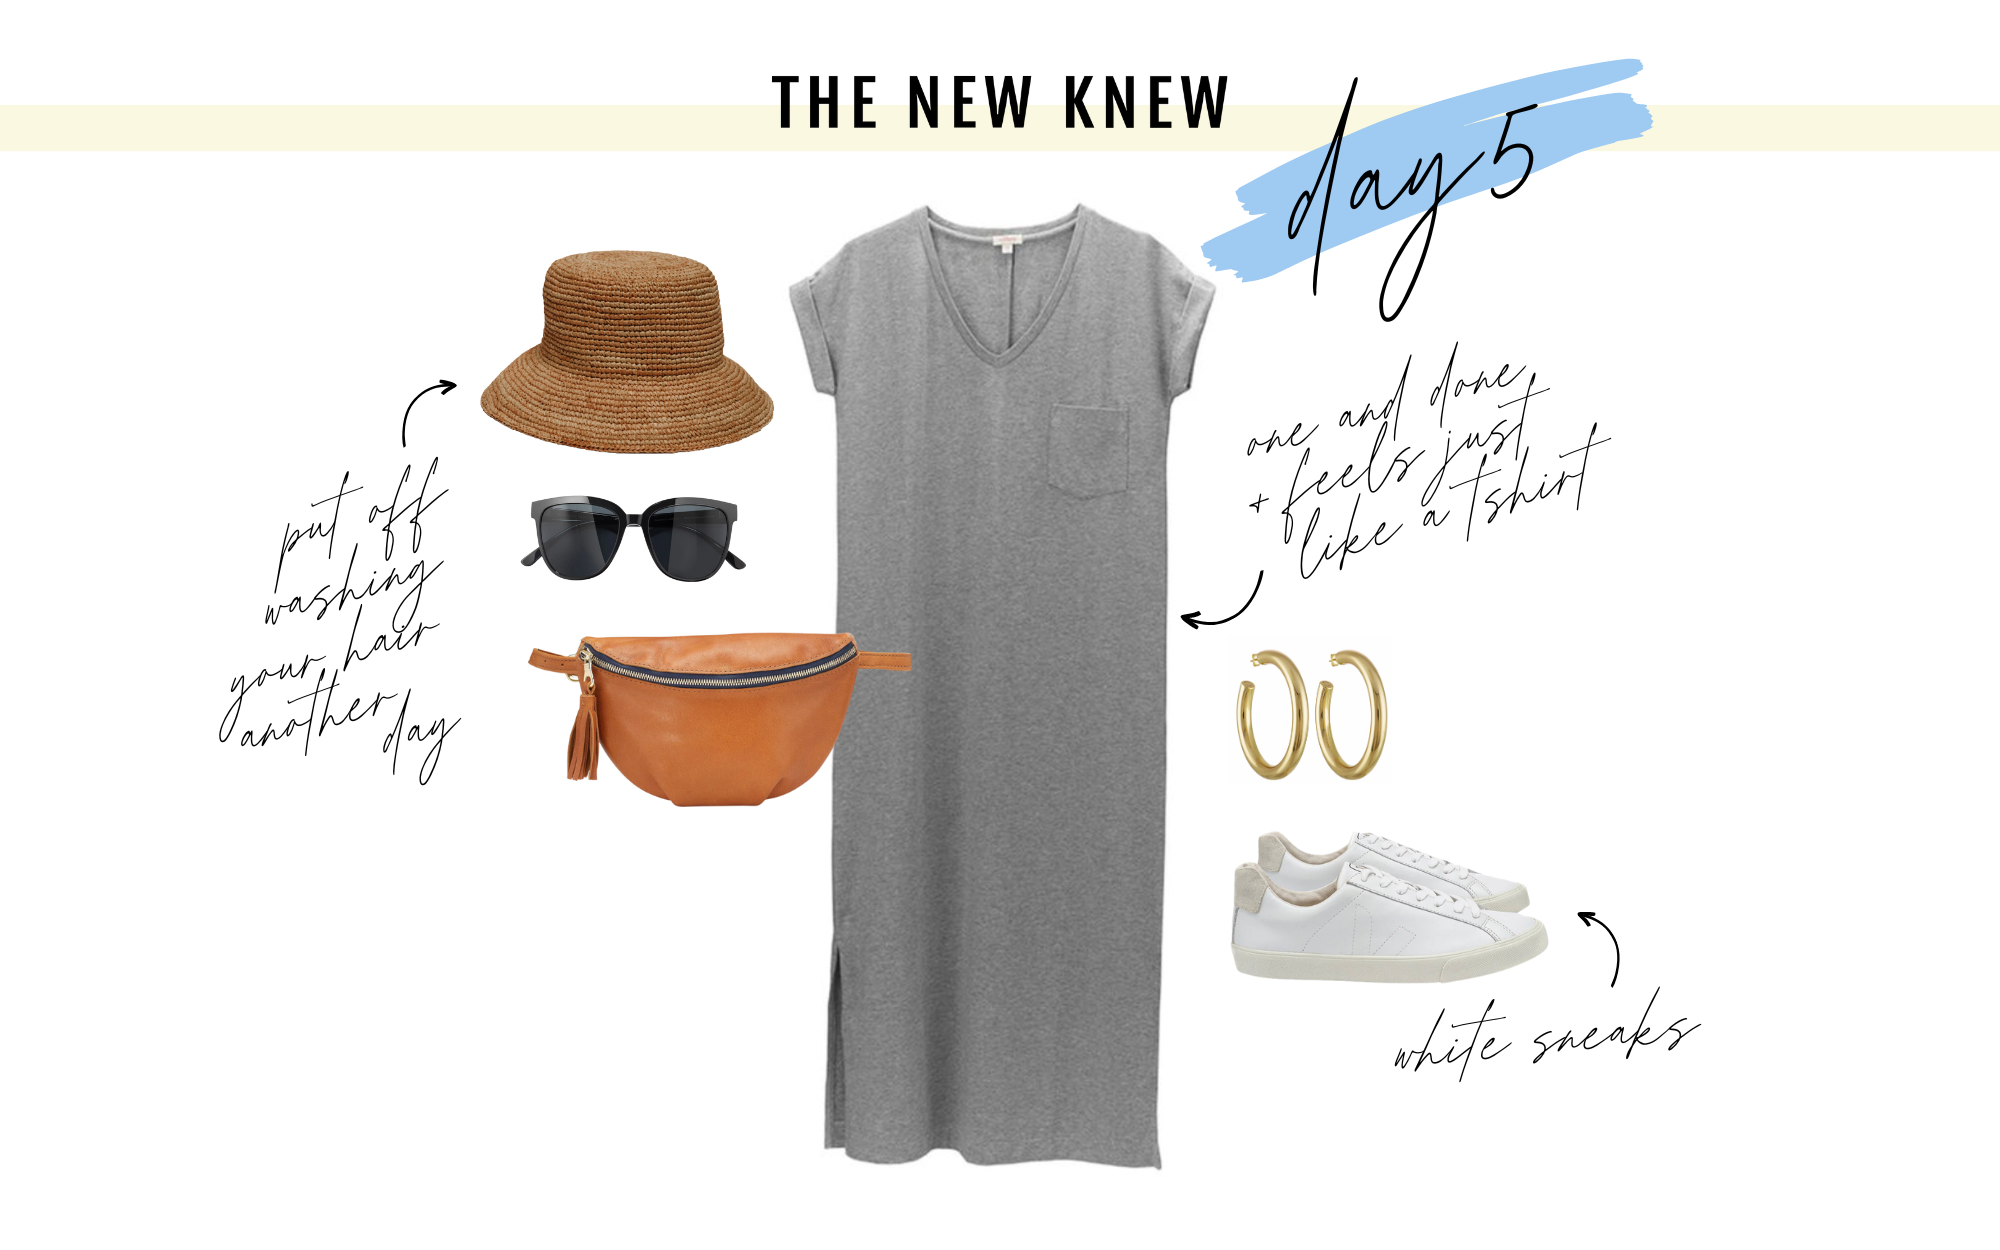 An outfit from a capsule wardrobe featuring a gray t-shirt dress.